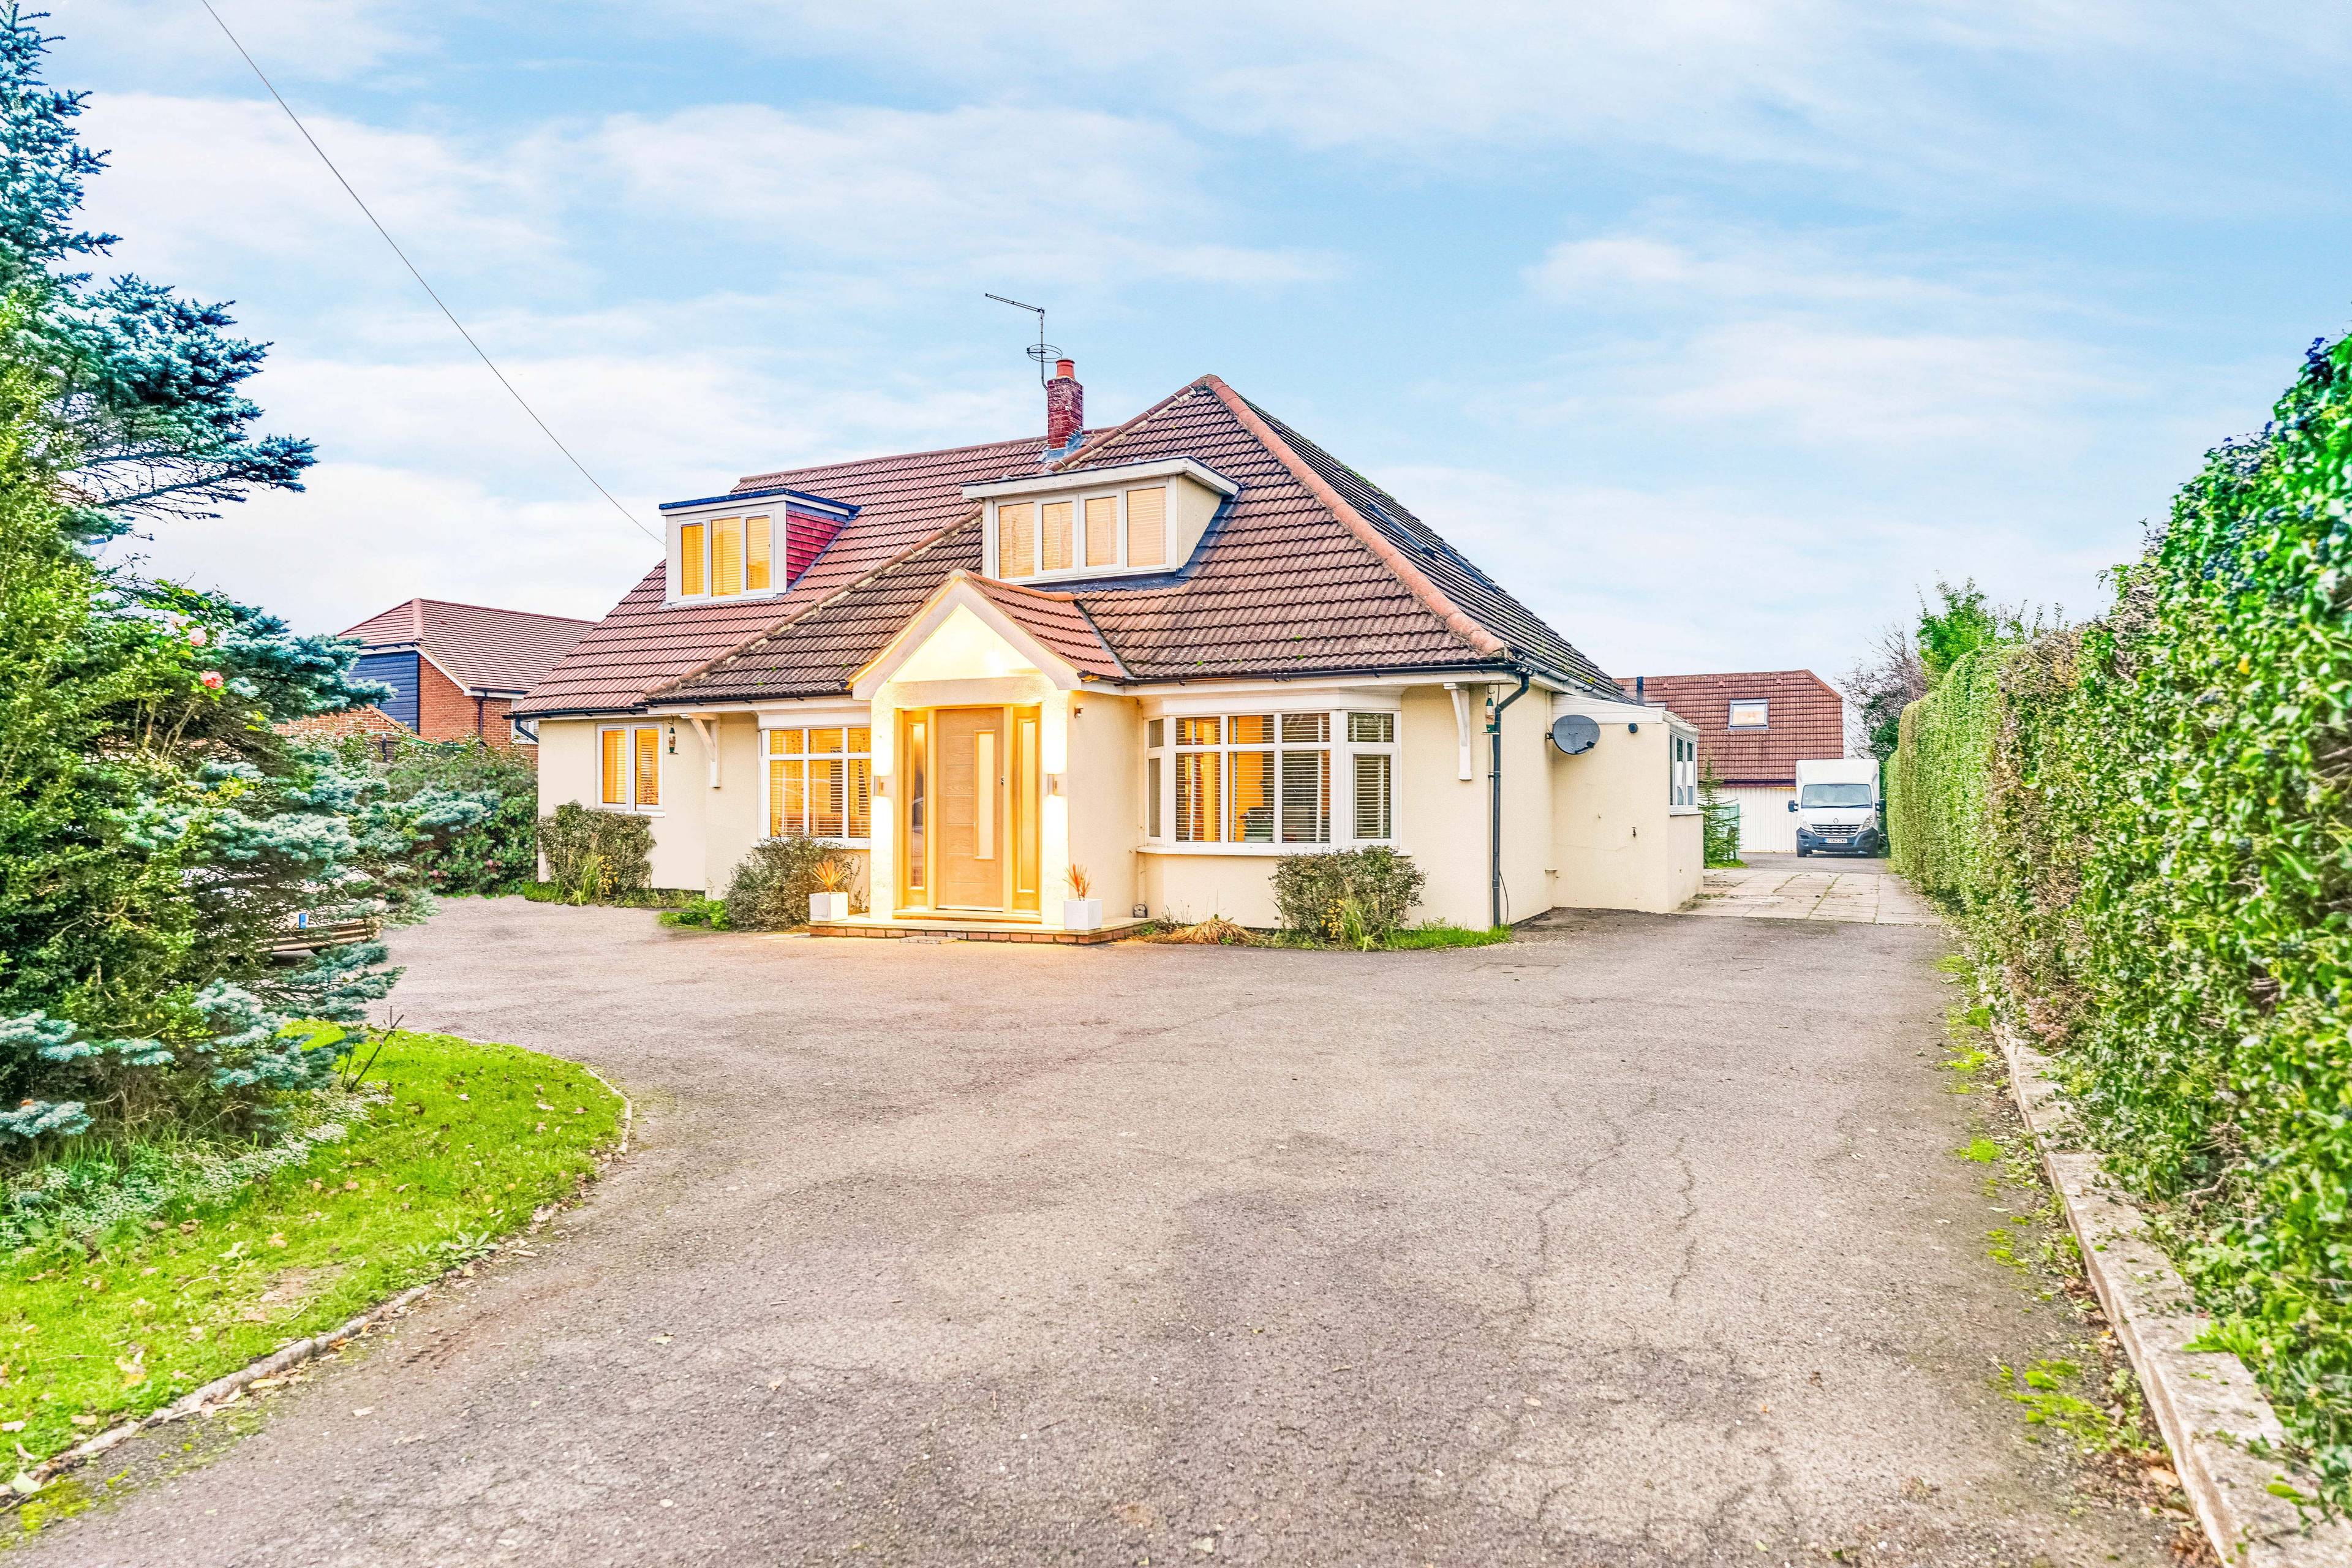 DETACHED, 5 BEDROOM, CHALET BUNGALOW LOCATED WITHIN THE DESIRABLE VILLAGE OF TAKELEY, BISHOPS STORTFORD